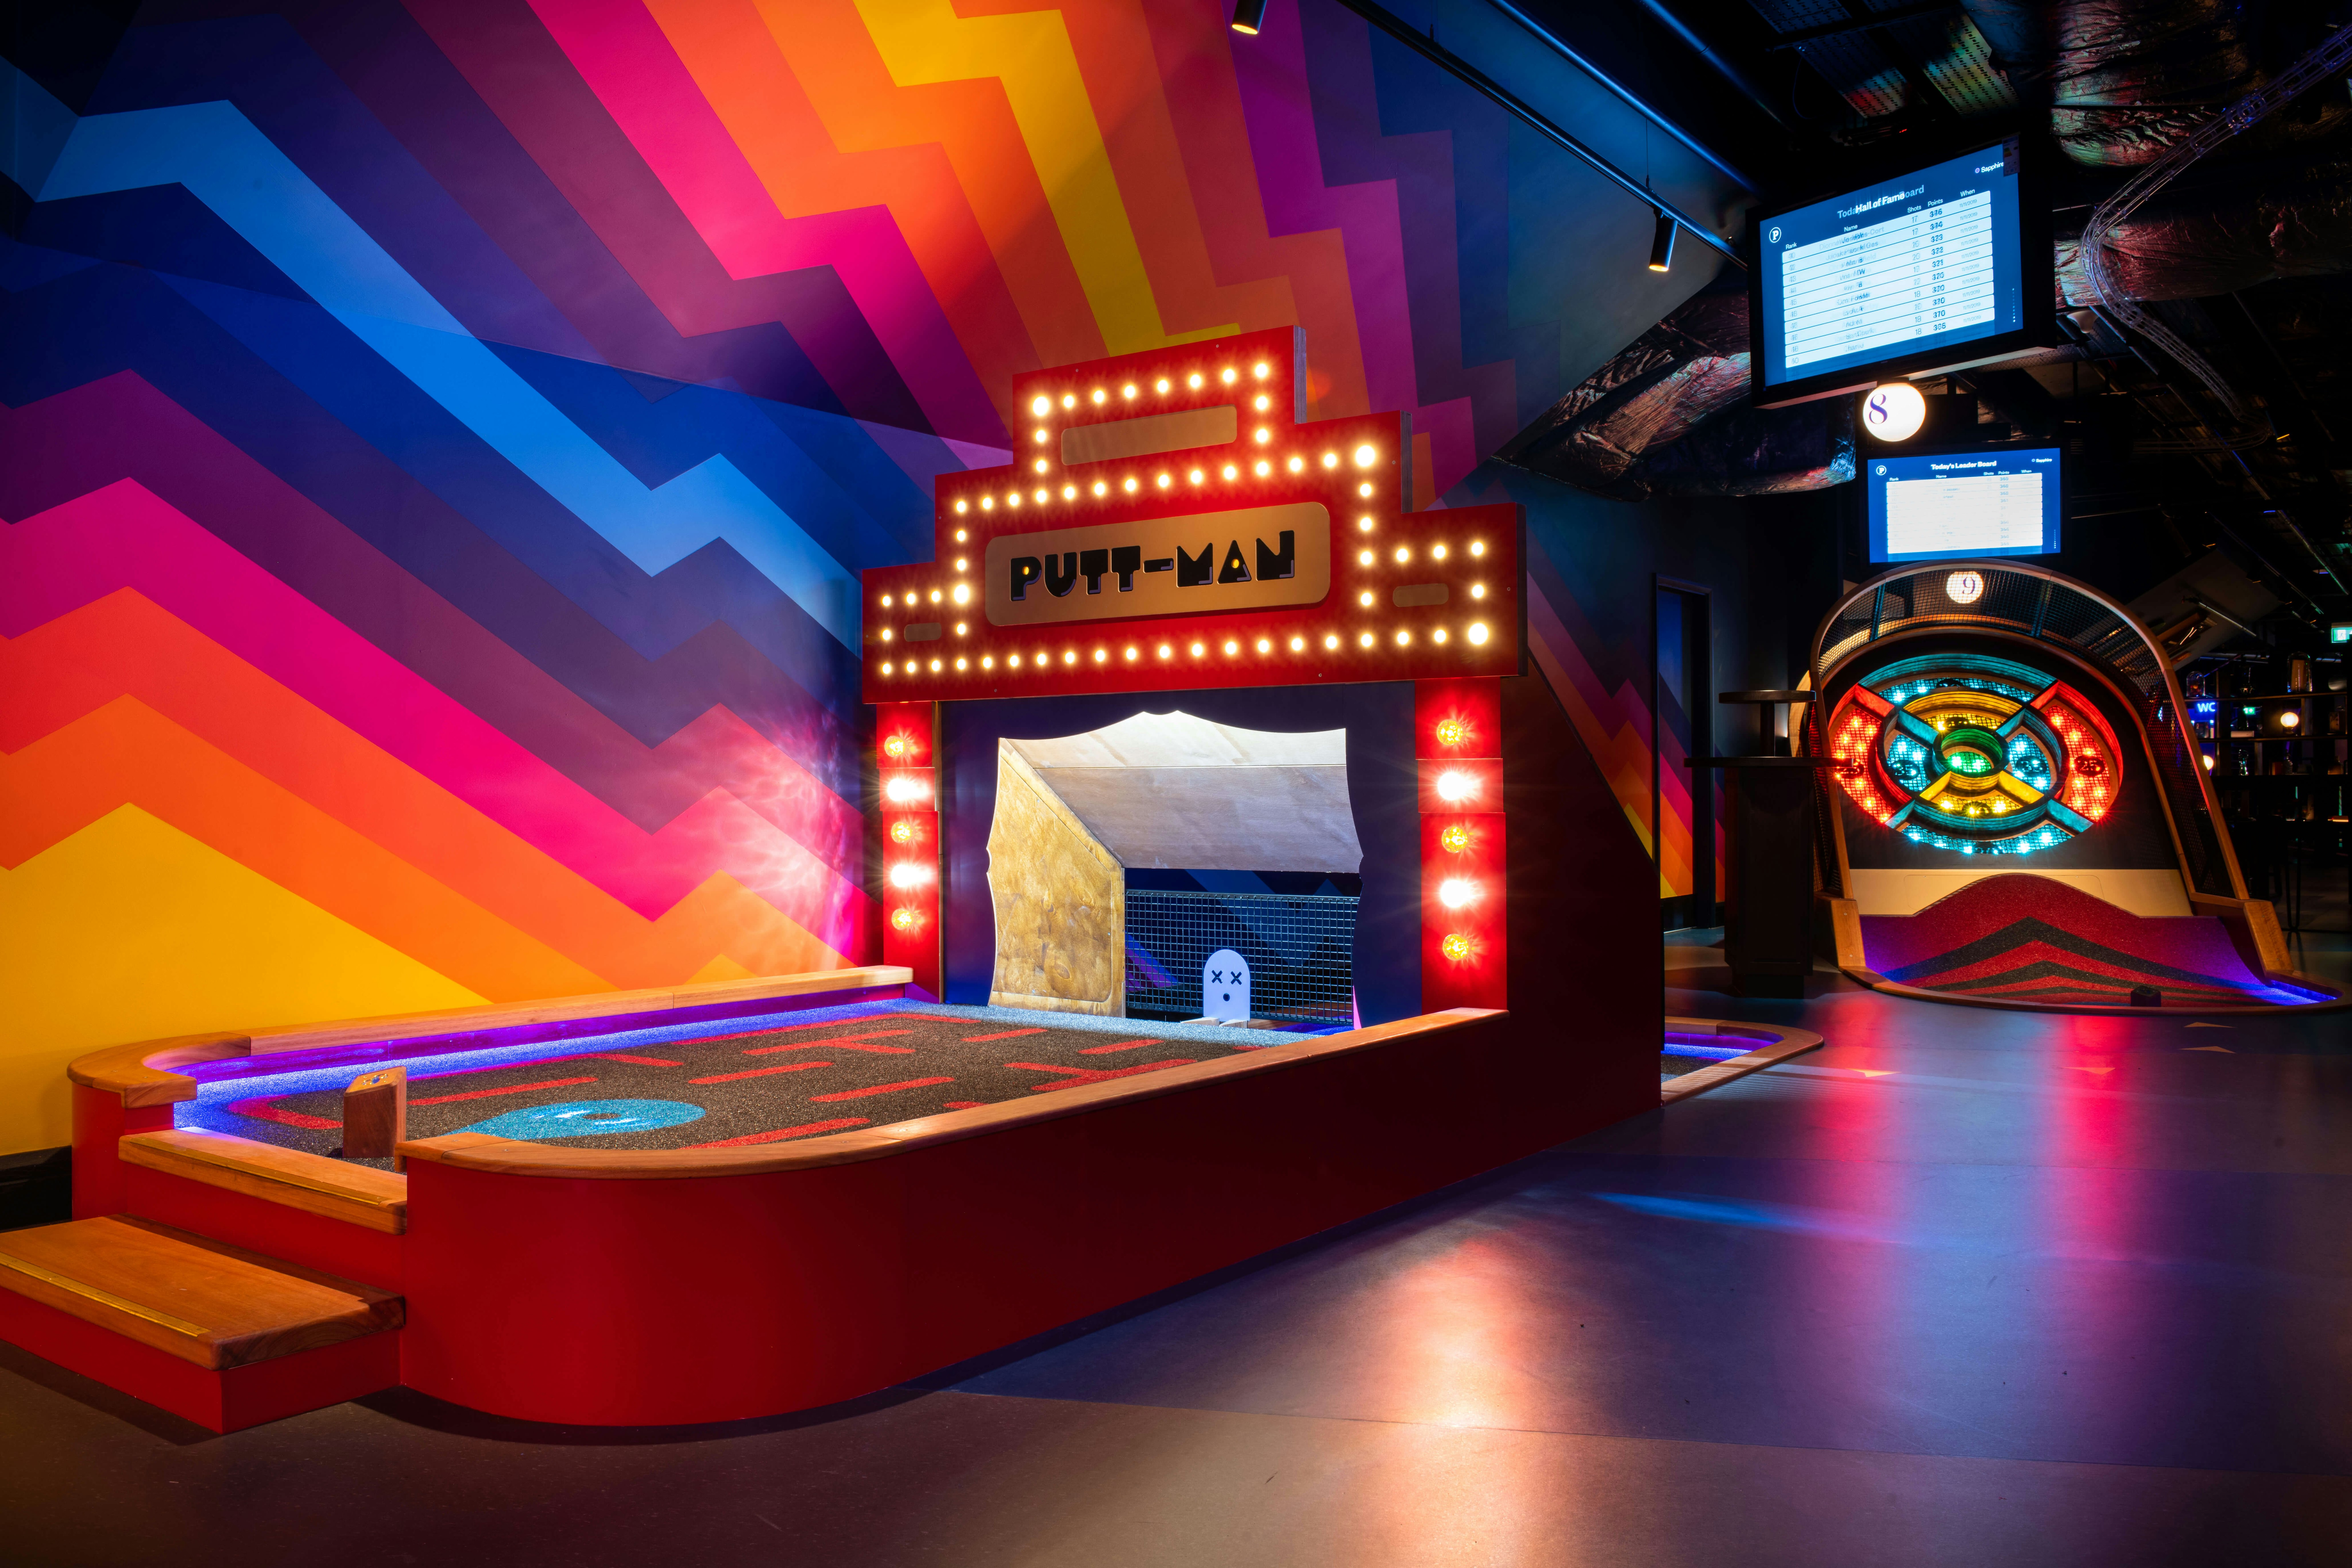 A room painted in bright colors and geometric shapes, with Putt-Man and a light-up skeeball